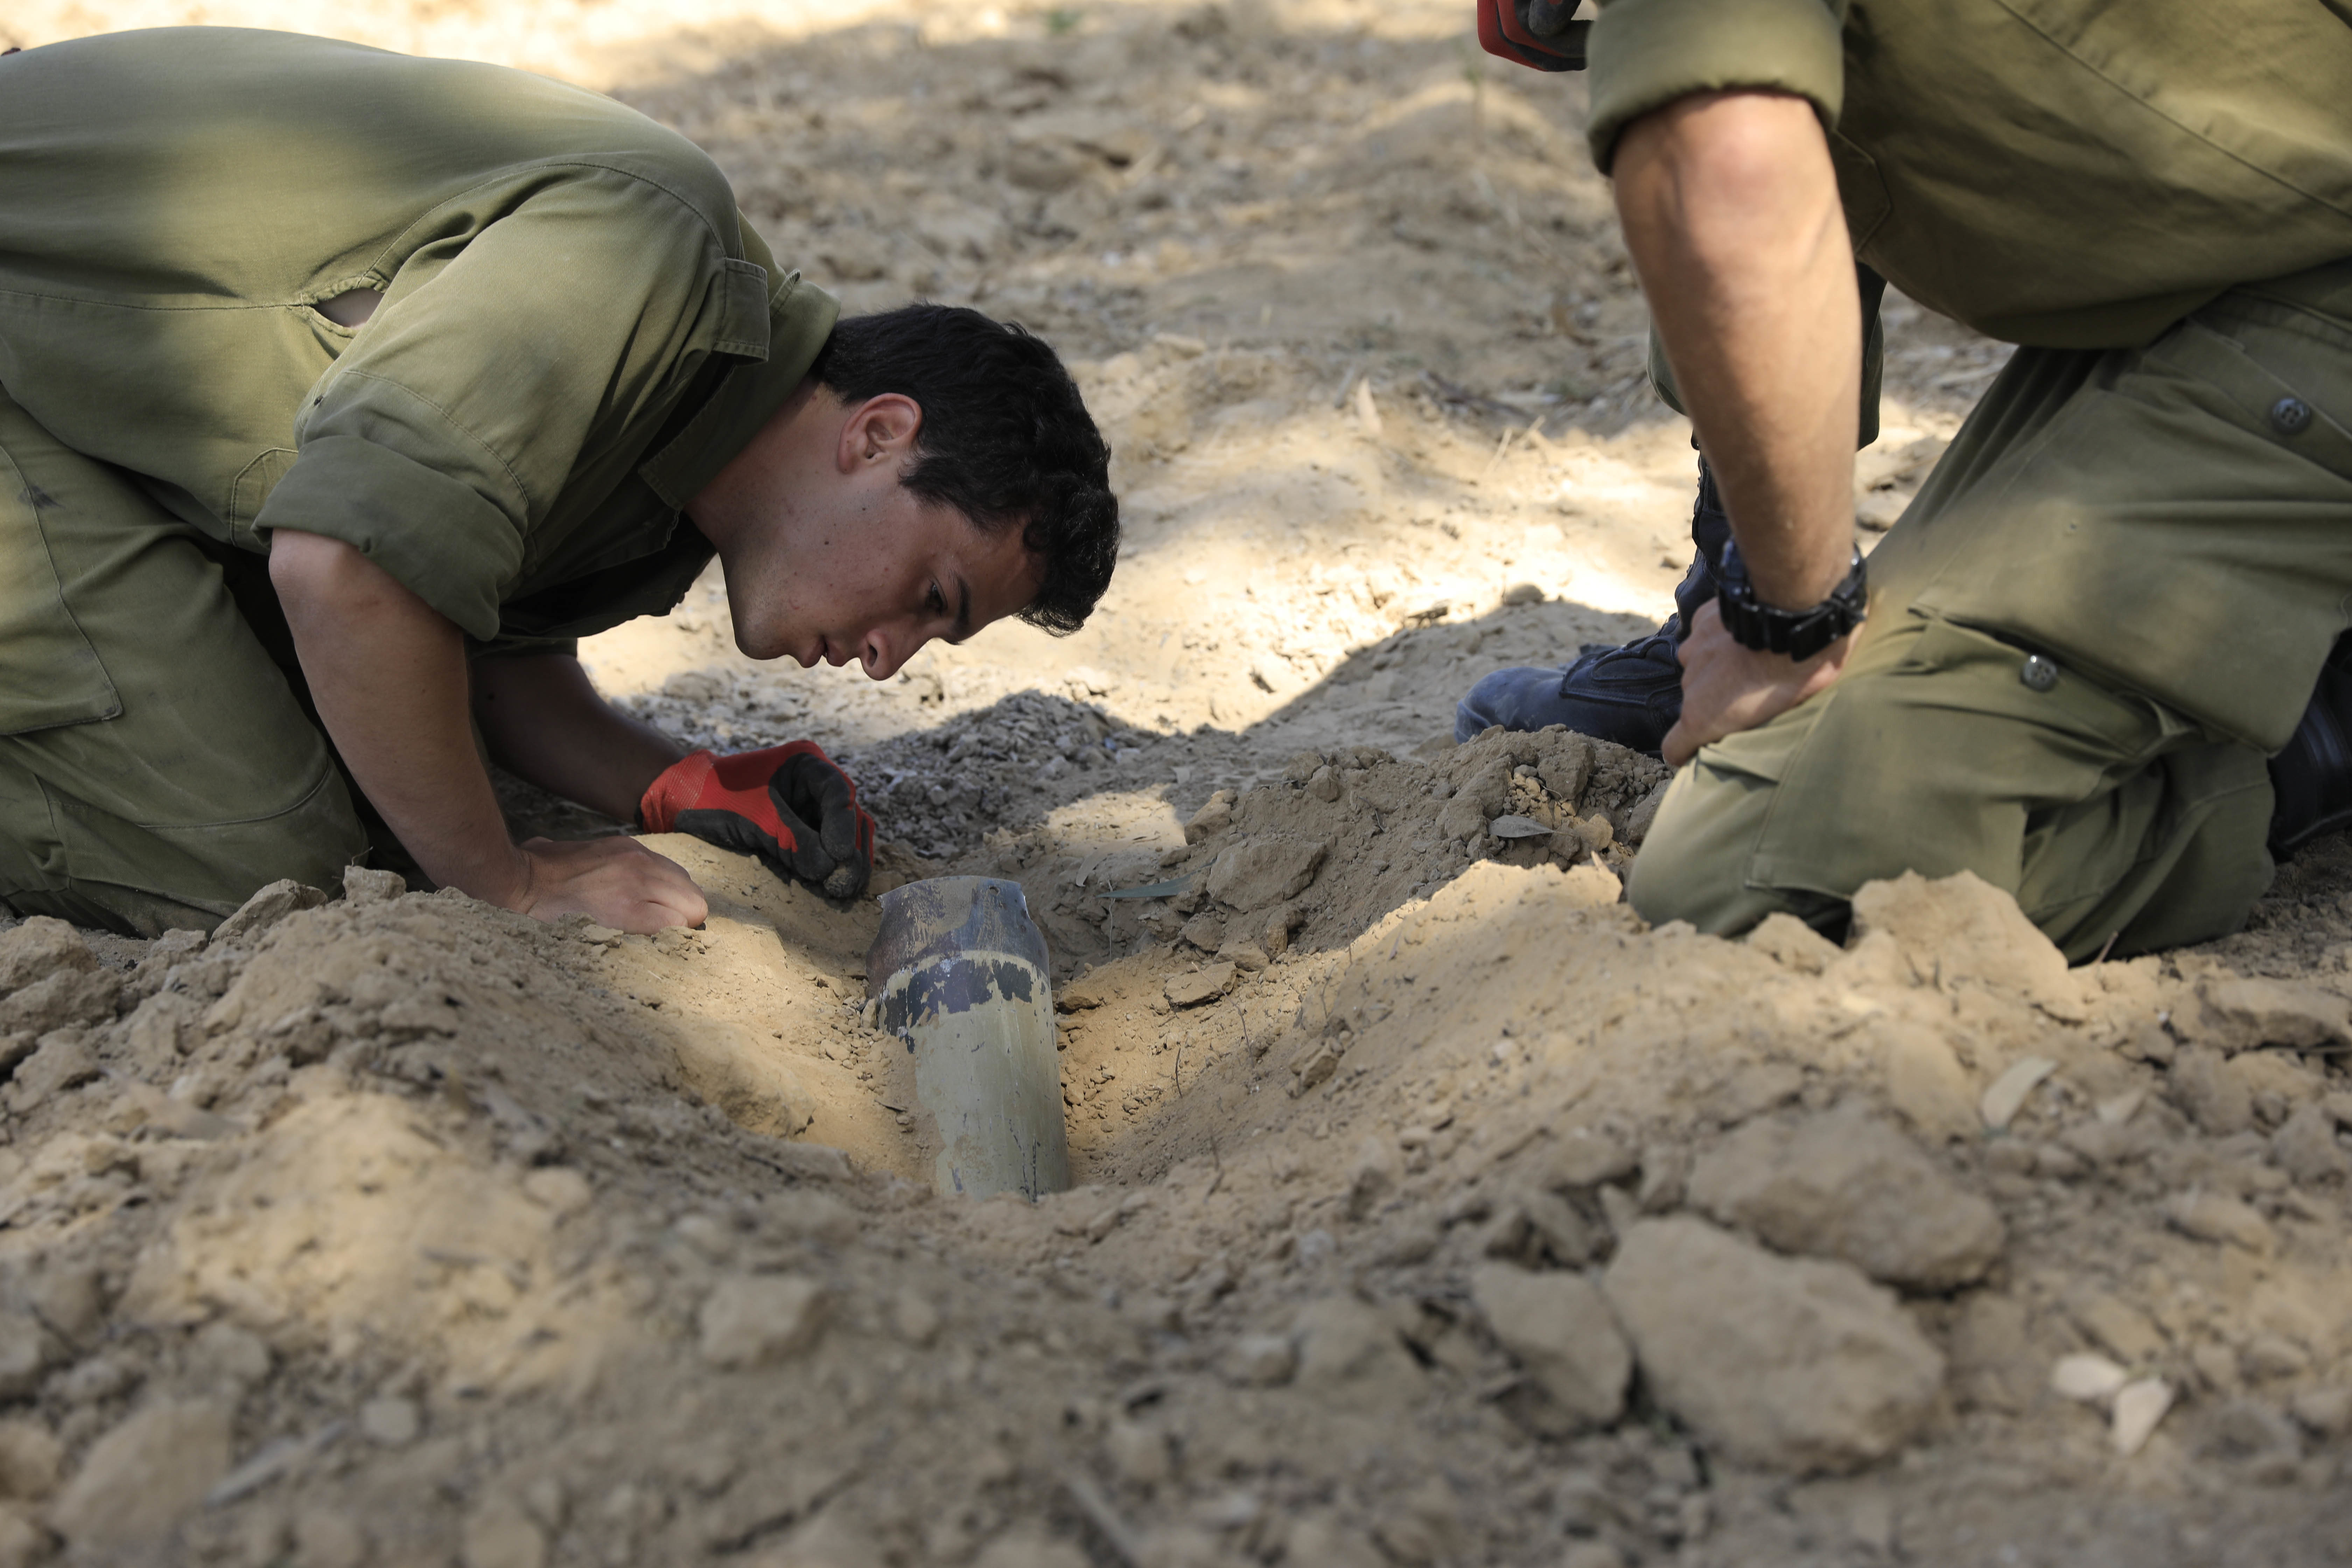 Israeli soldiers inspect a missile launched from the Gaza Strip